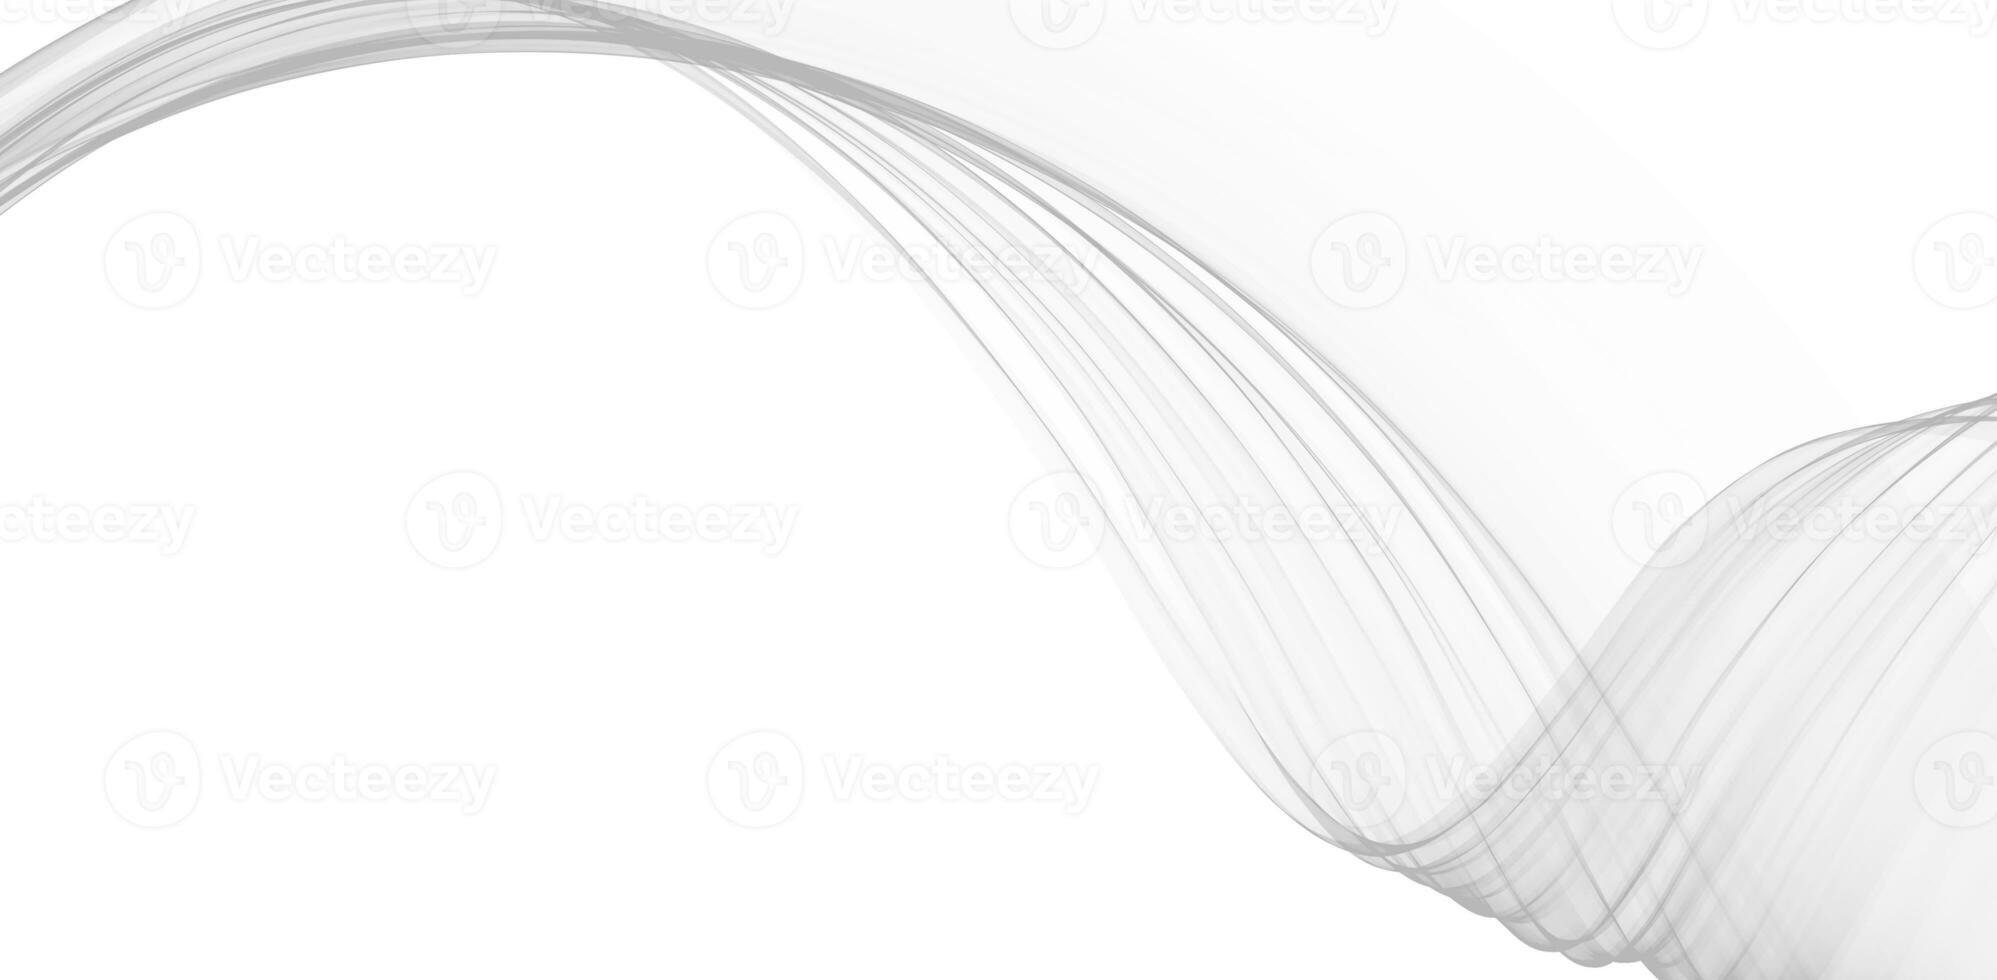 Background design with Smooth Wavy Lines photo